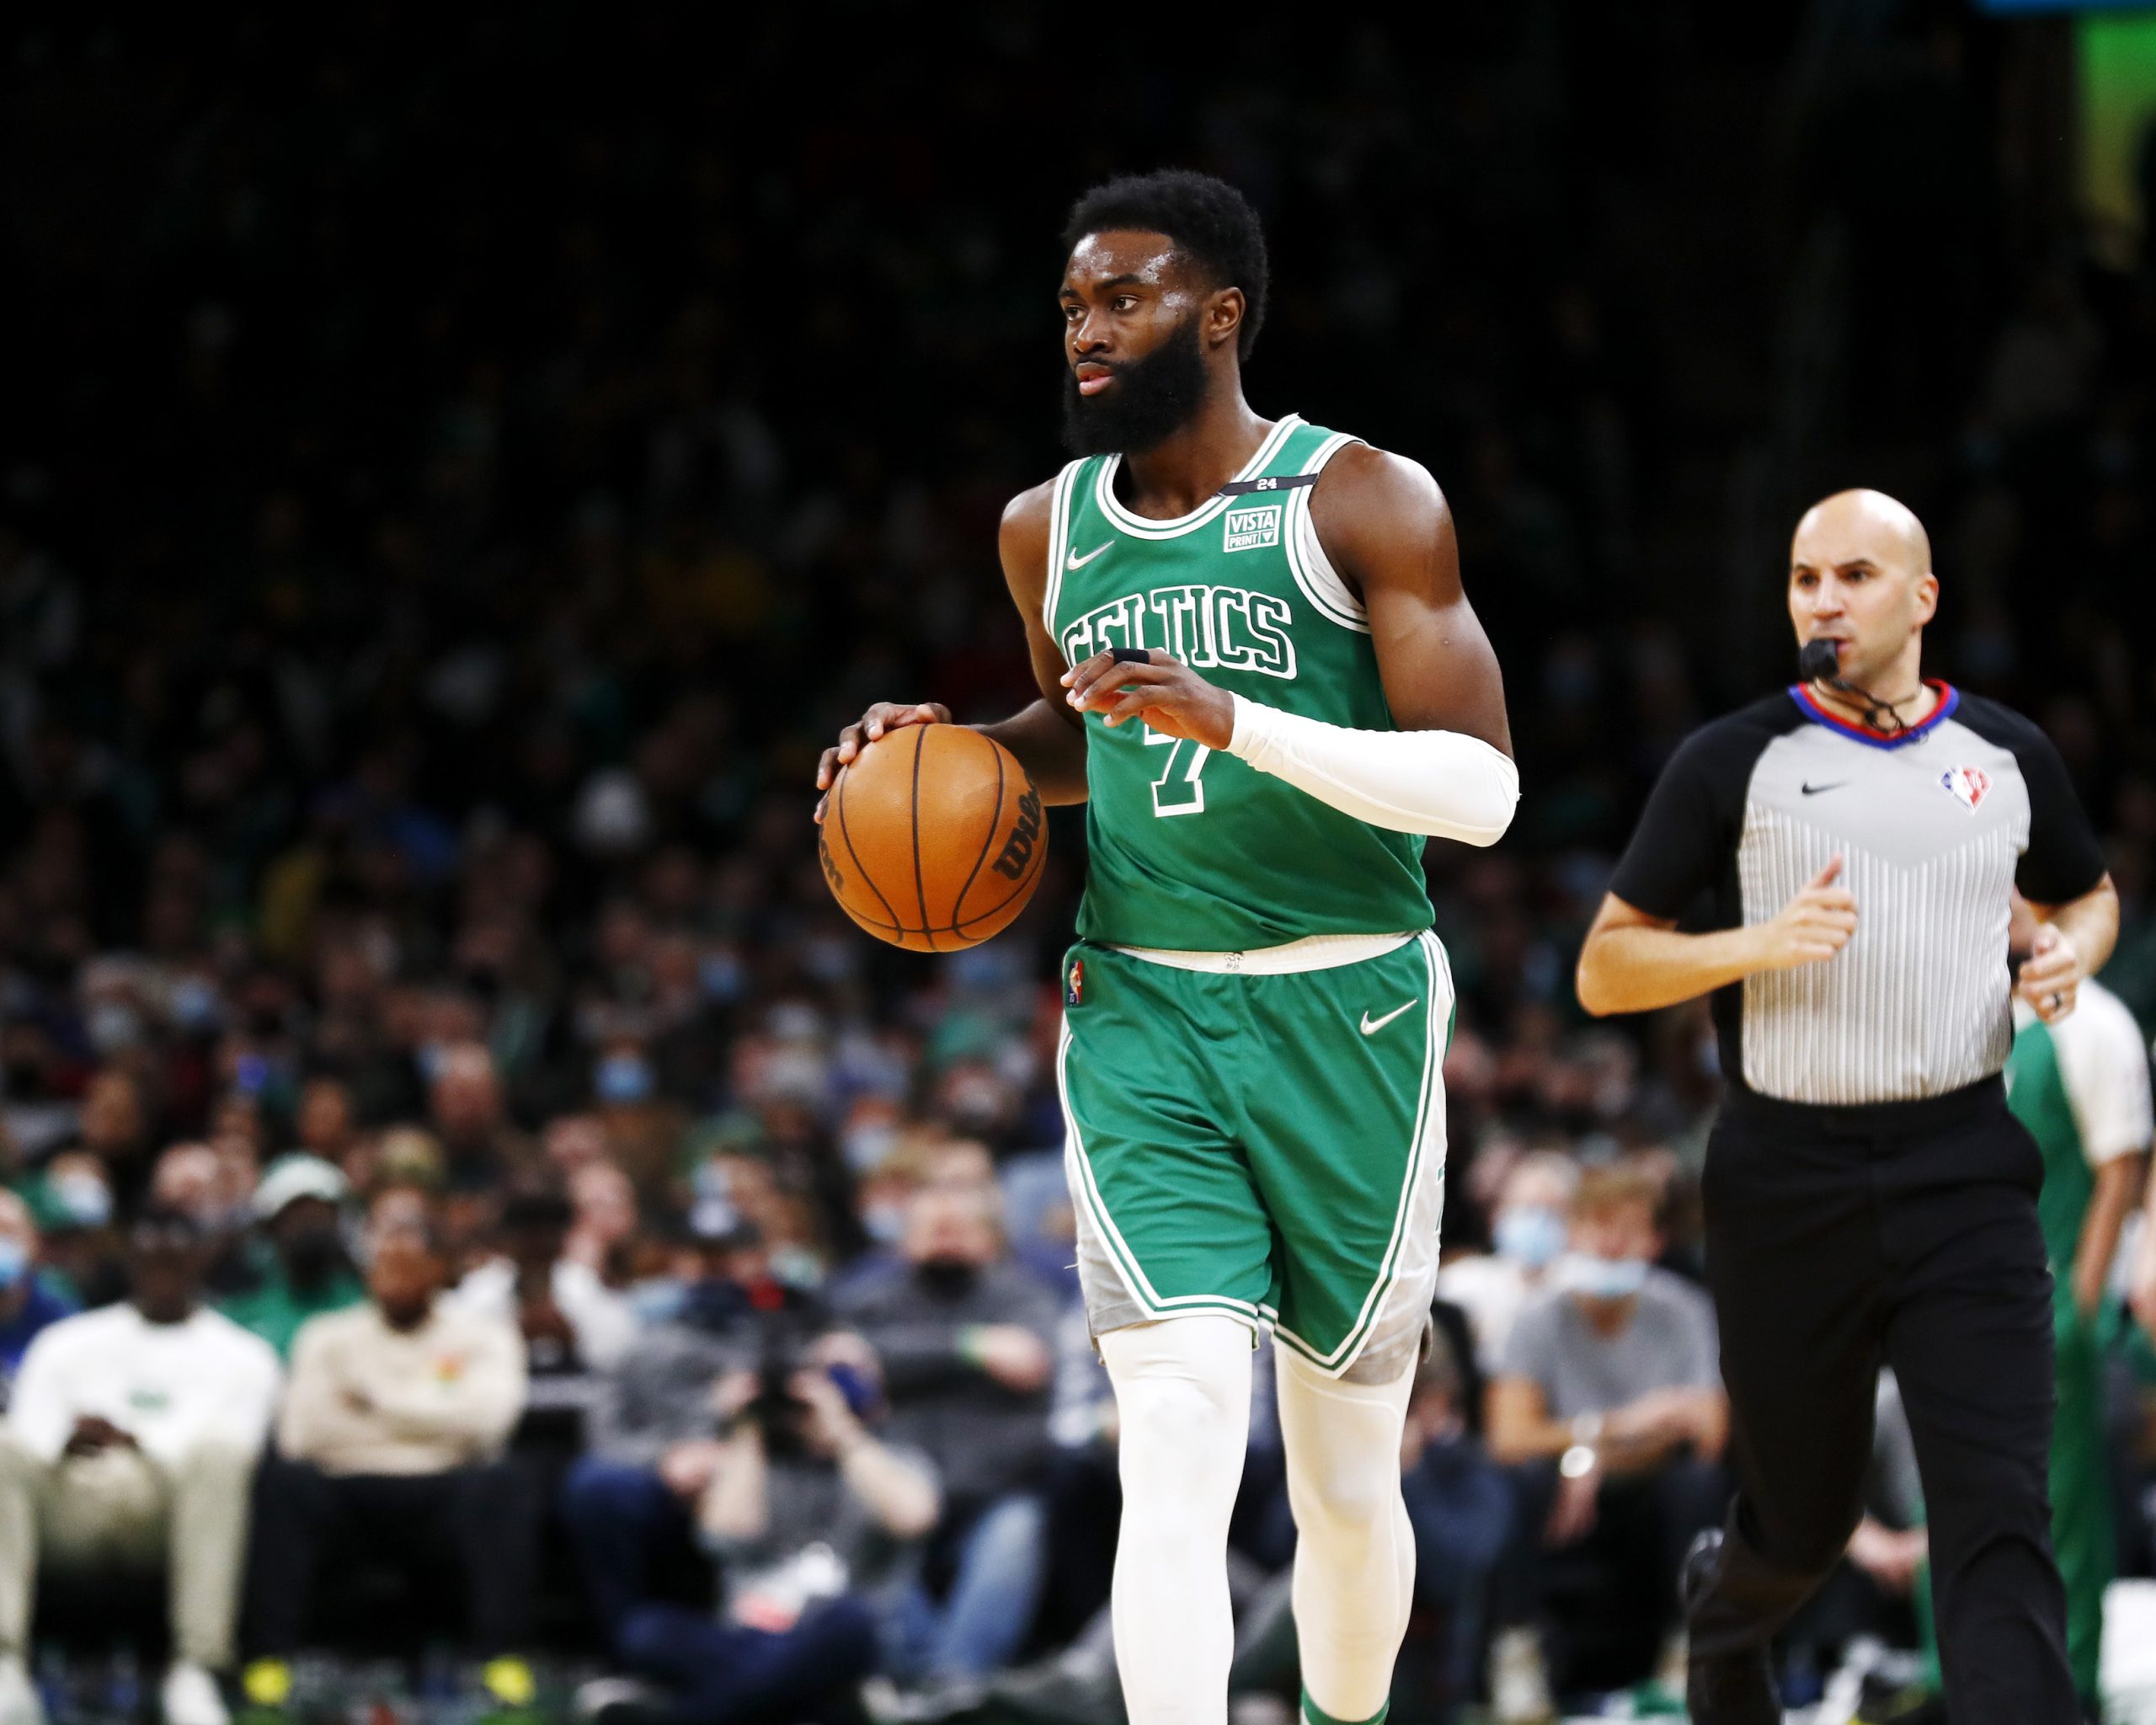 Boston Celtics swingman Jaylen Brown dribbles the ball up the floor during an NBA game against the Miami Heat